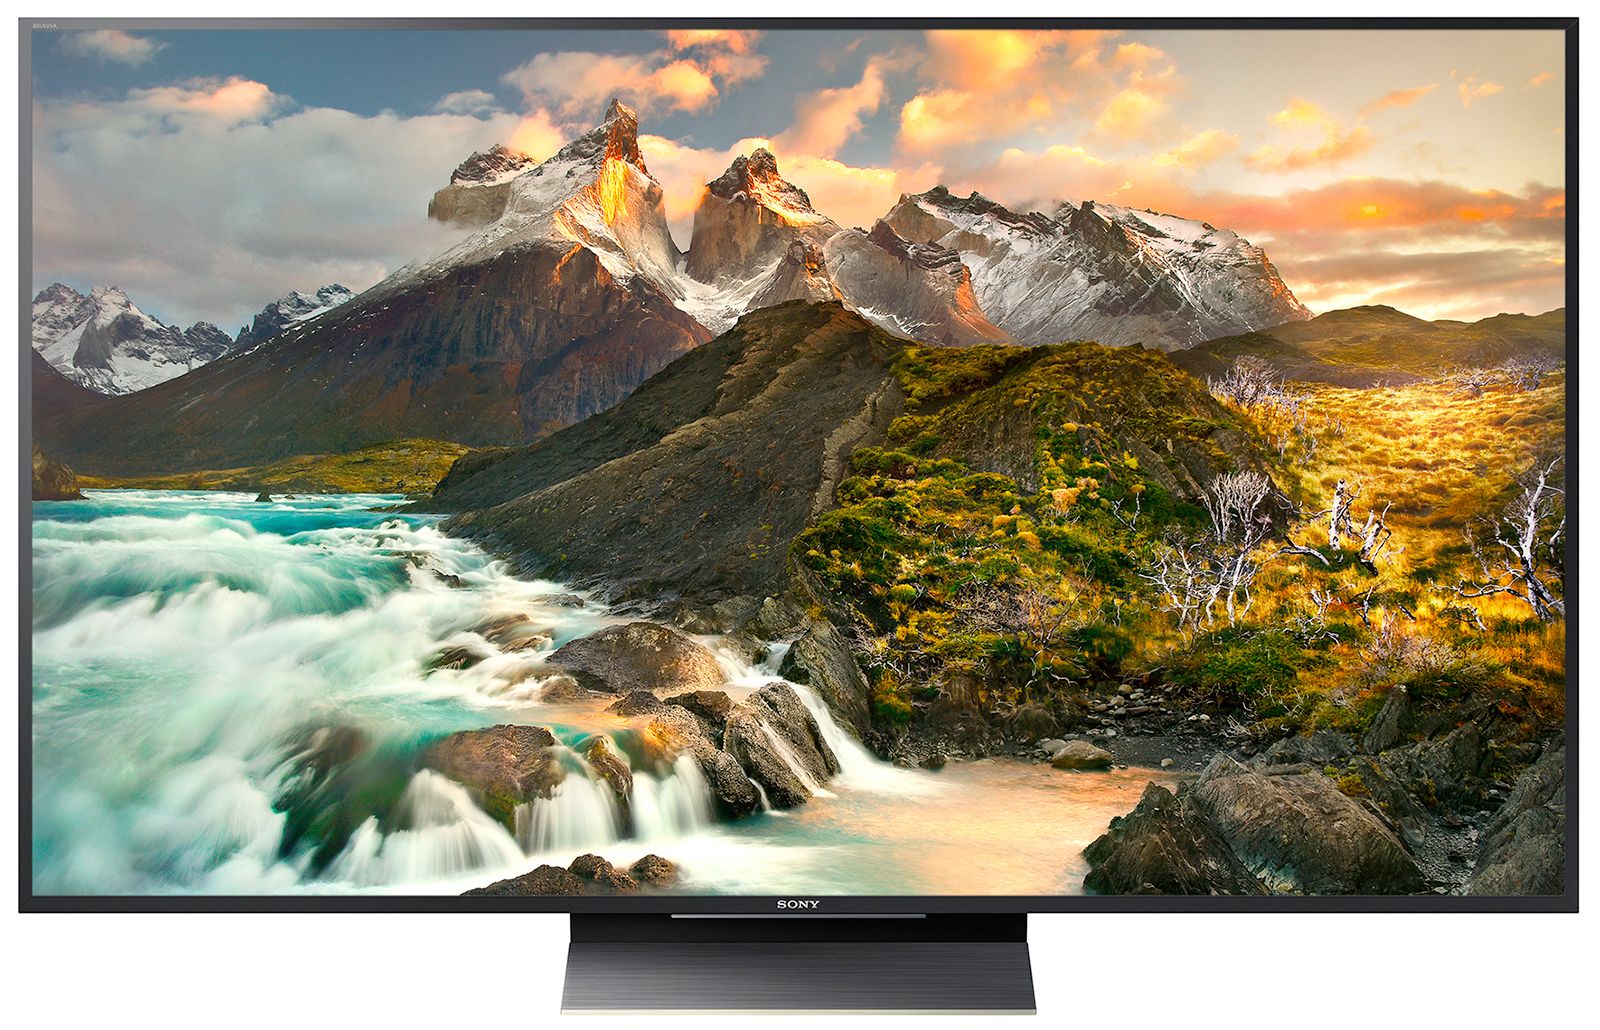 sony 4k hdr tv choices for 2017 a1 oled zd9 xe94 xe93 xe90 xe85 xe80 xe70 compared image 7